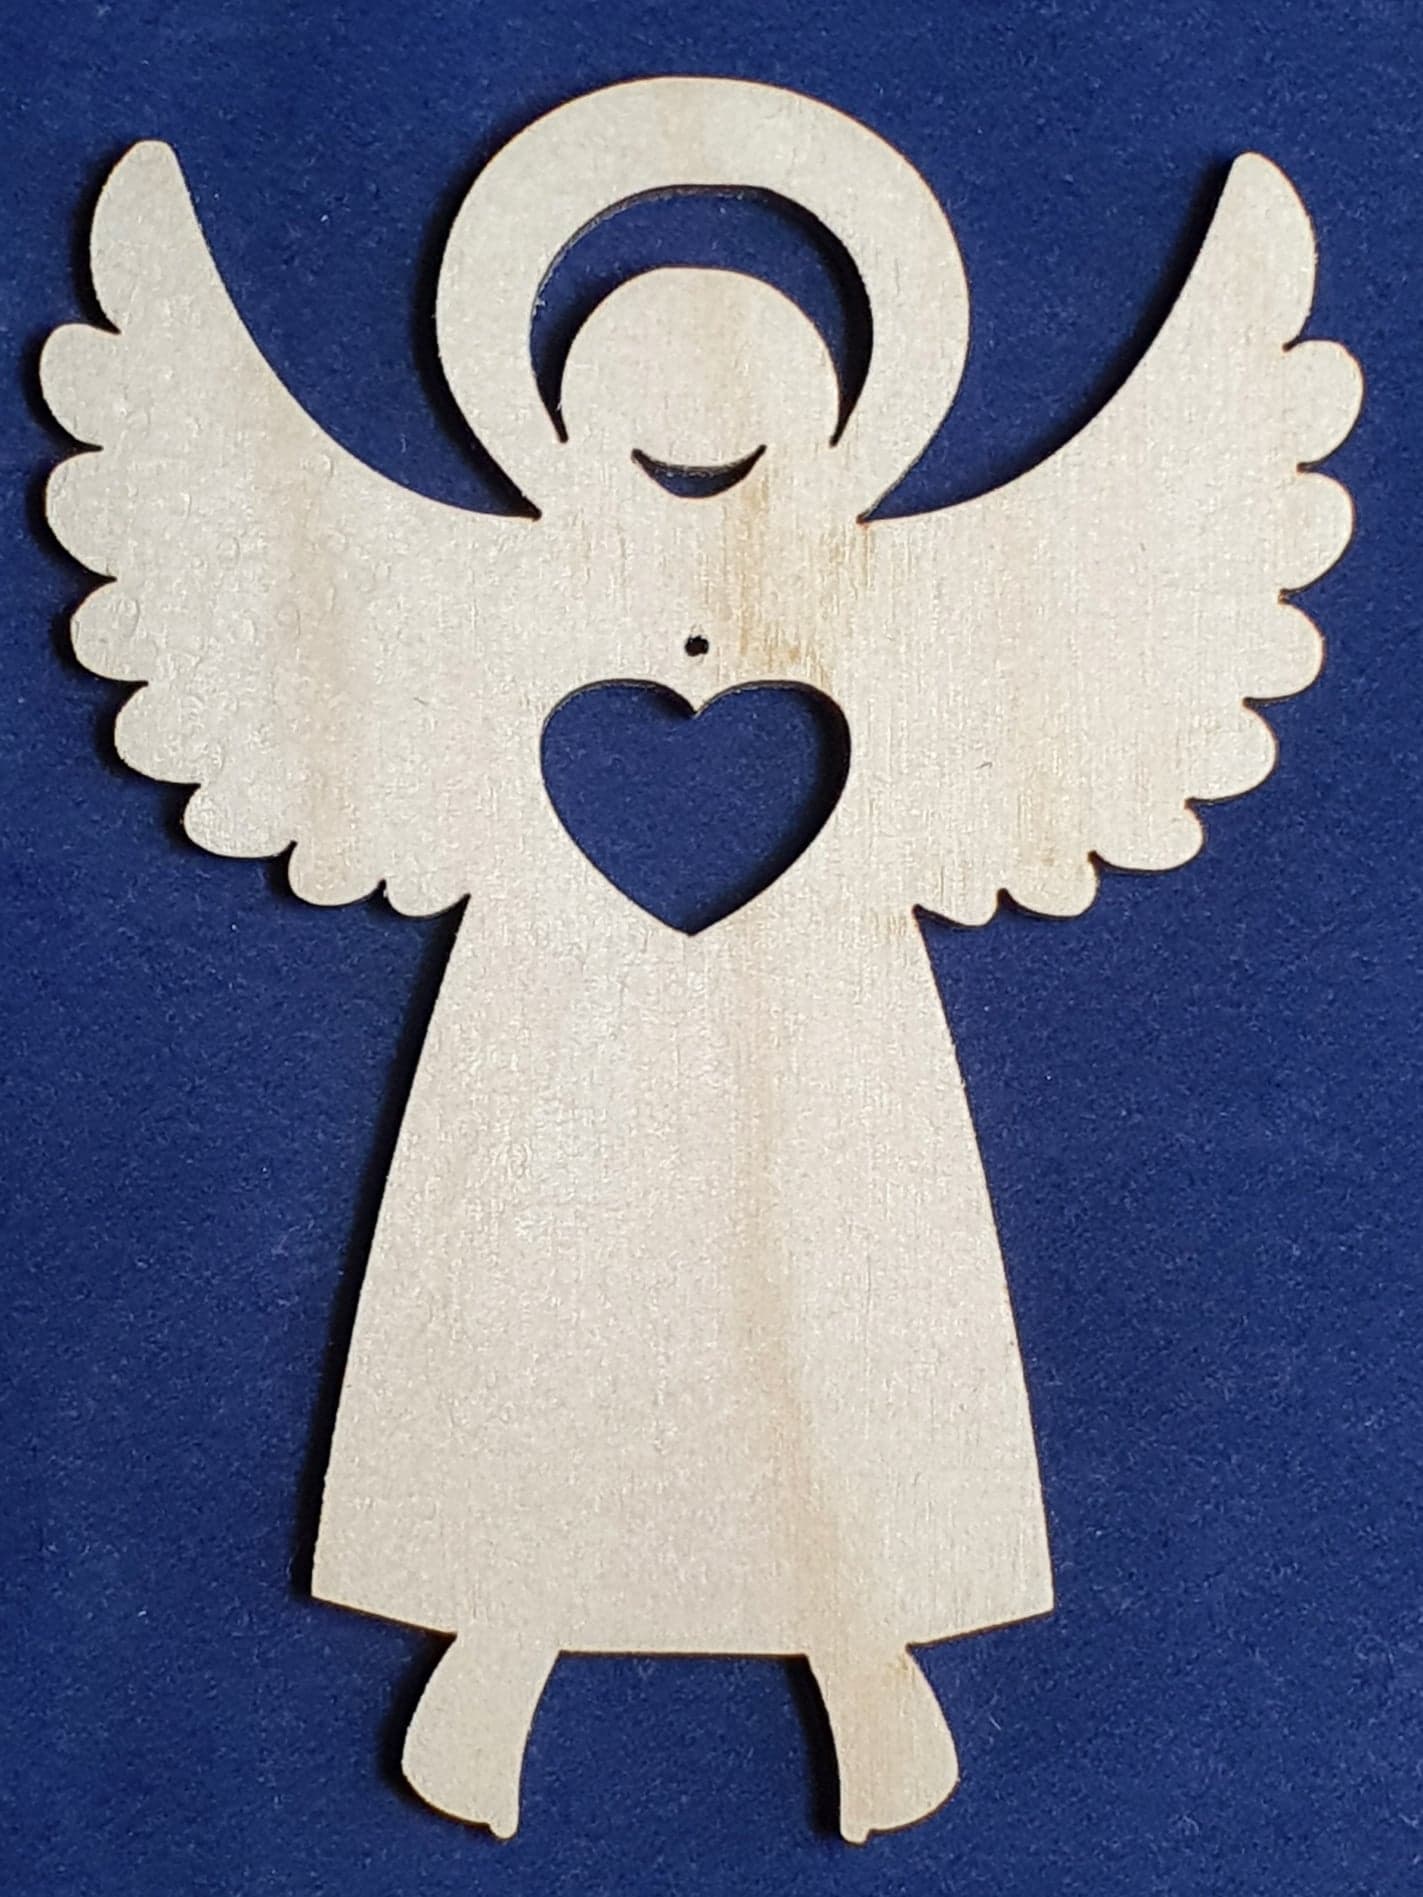 Rustic Charm Angel "Bless by Cats"